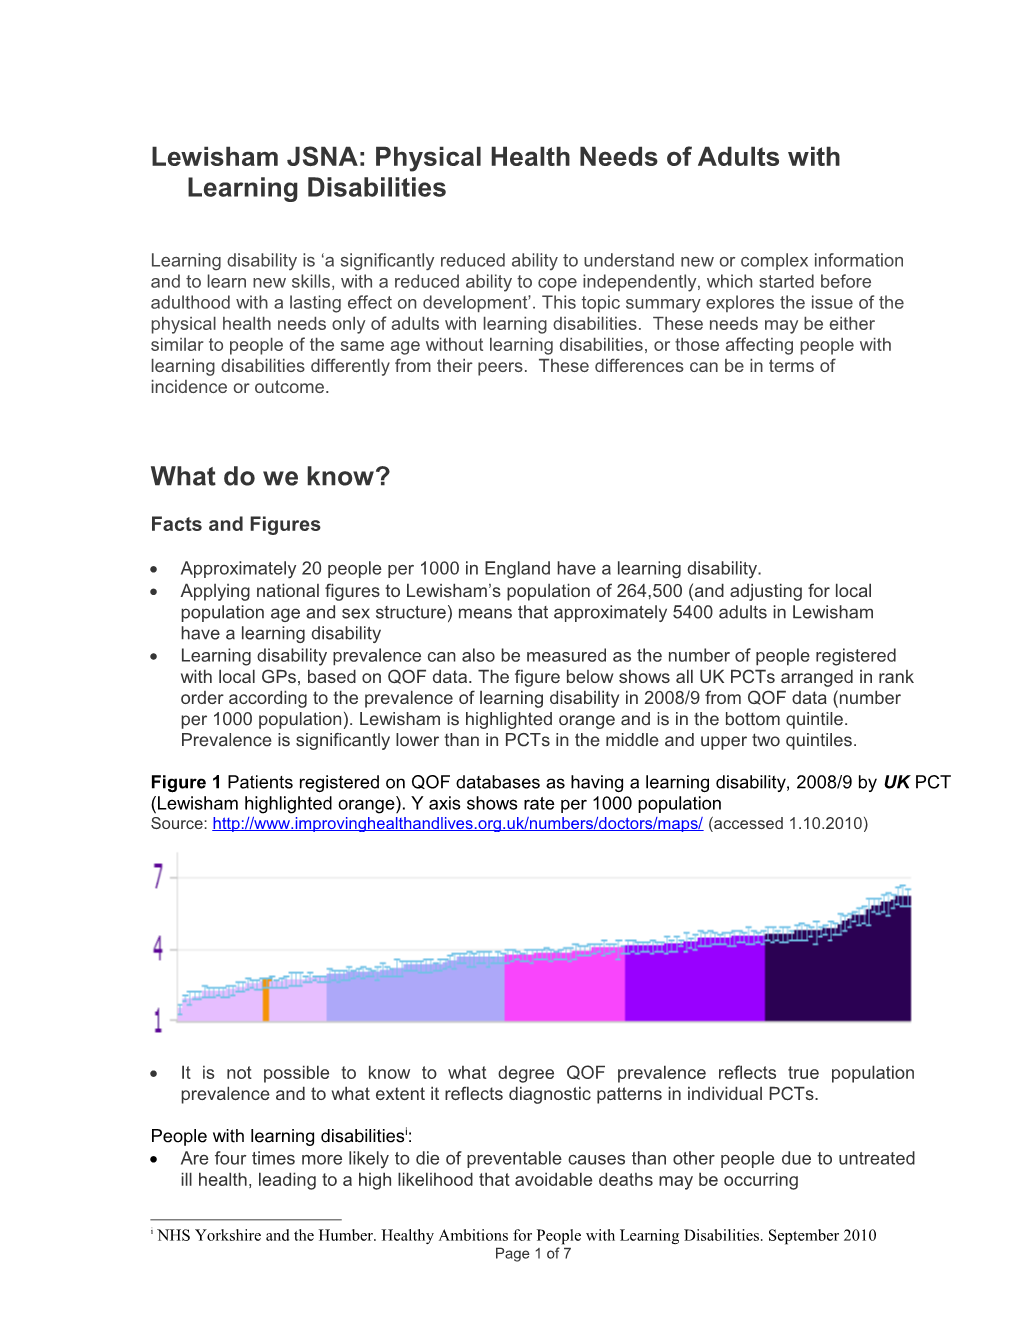 Lewisham JSNA: Physical Health Needs of Adults with Learning Disabilities